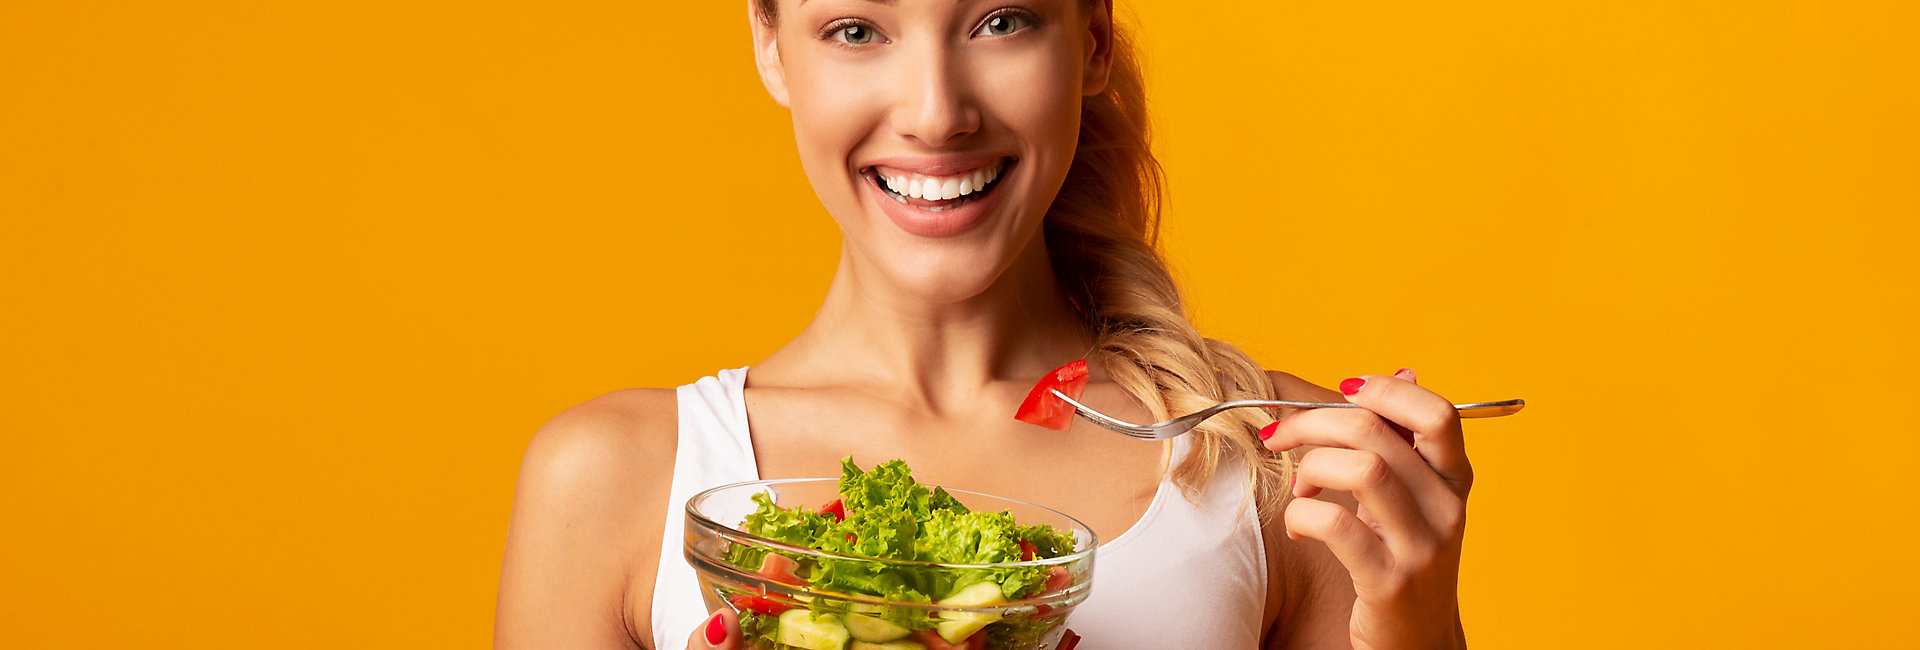 Sport And Diet. Cheerful Fitness Girl Eating Vegetable Salad Standing In Studio Over Yellow Background.; Shutterstock ID 1513976609; purchase_order: -; job: -; client: -